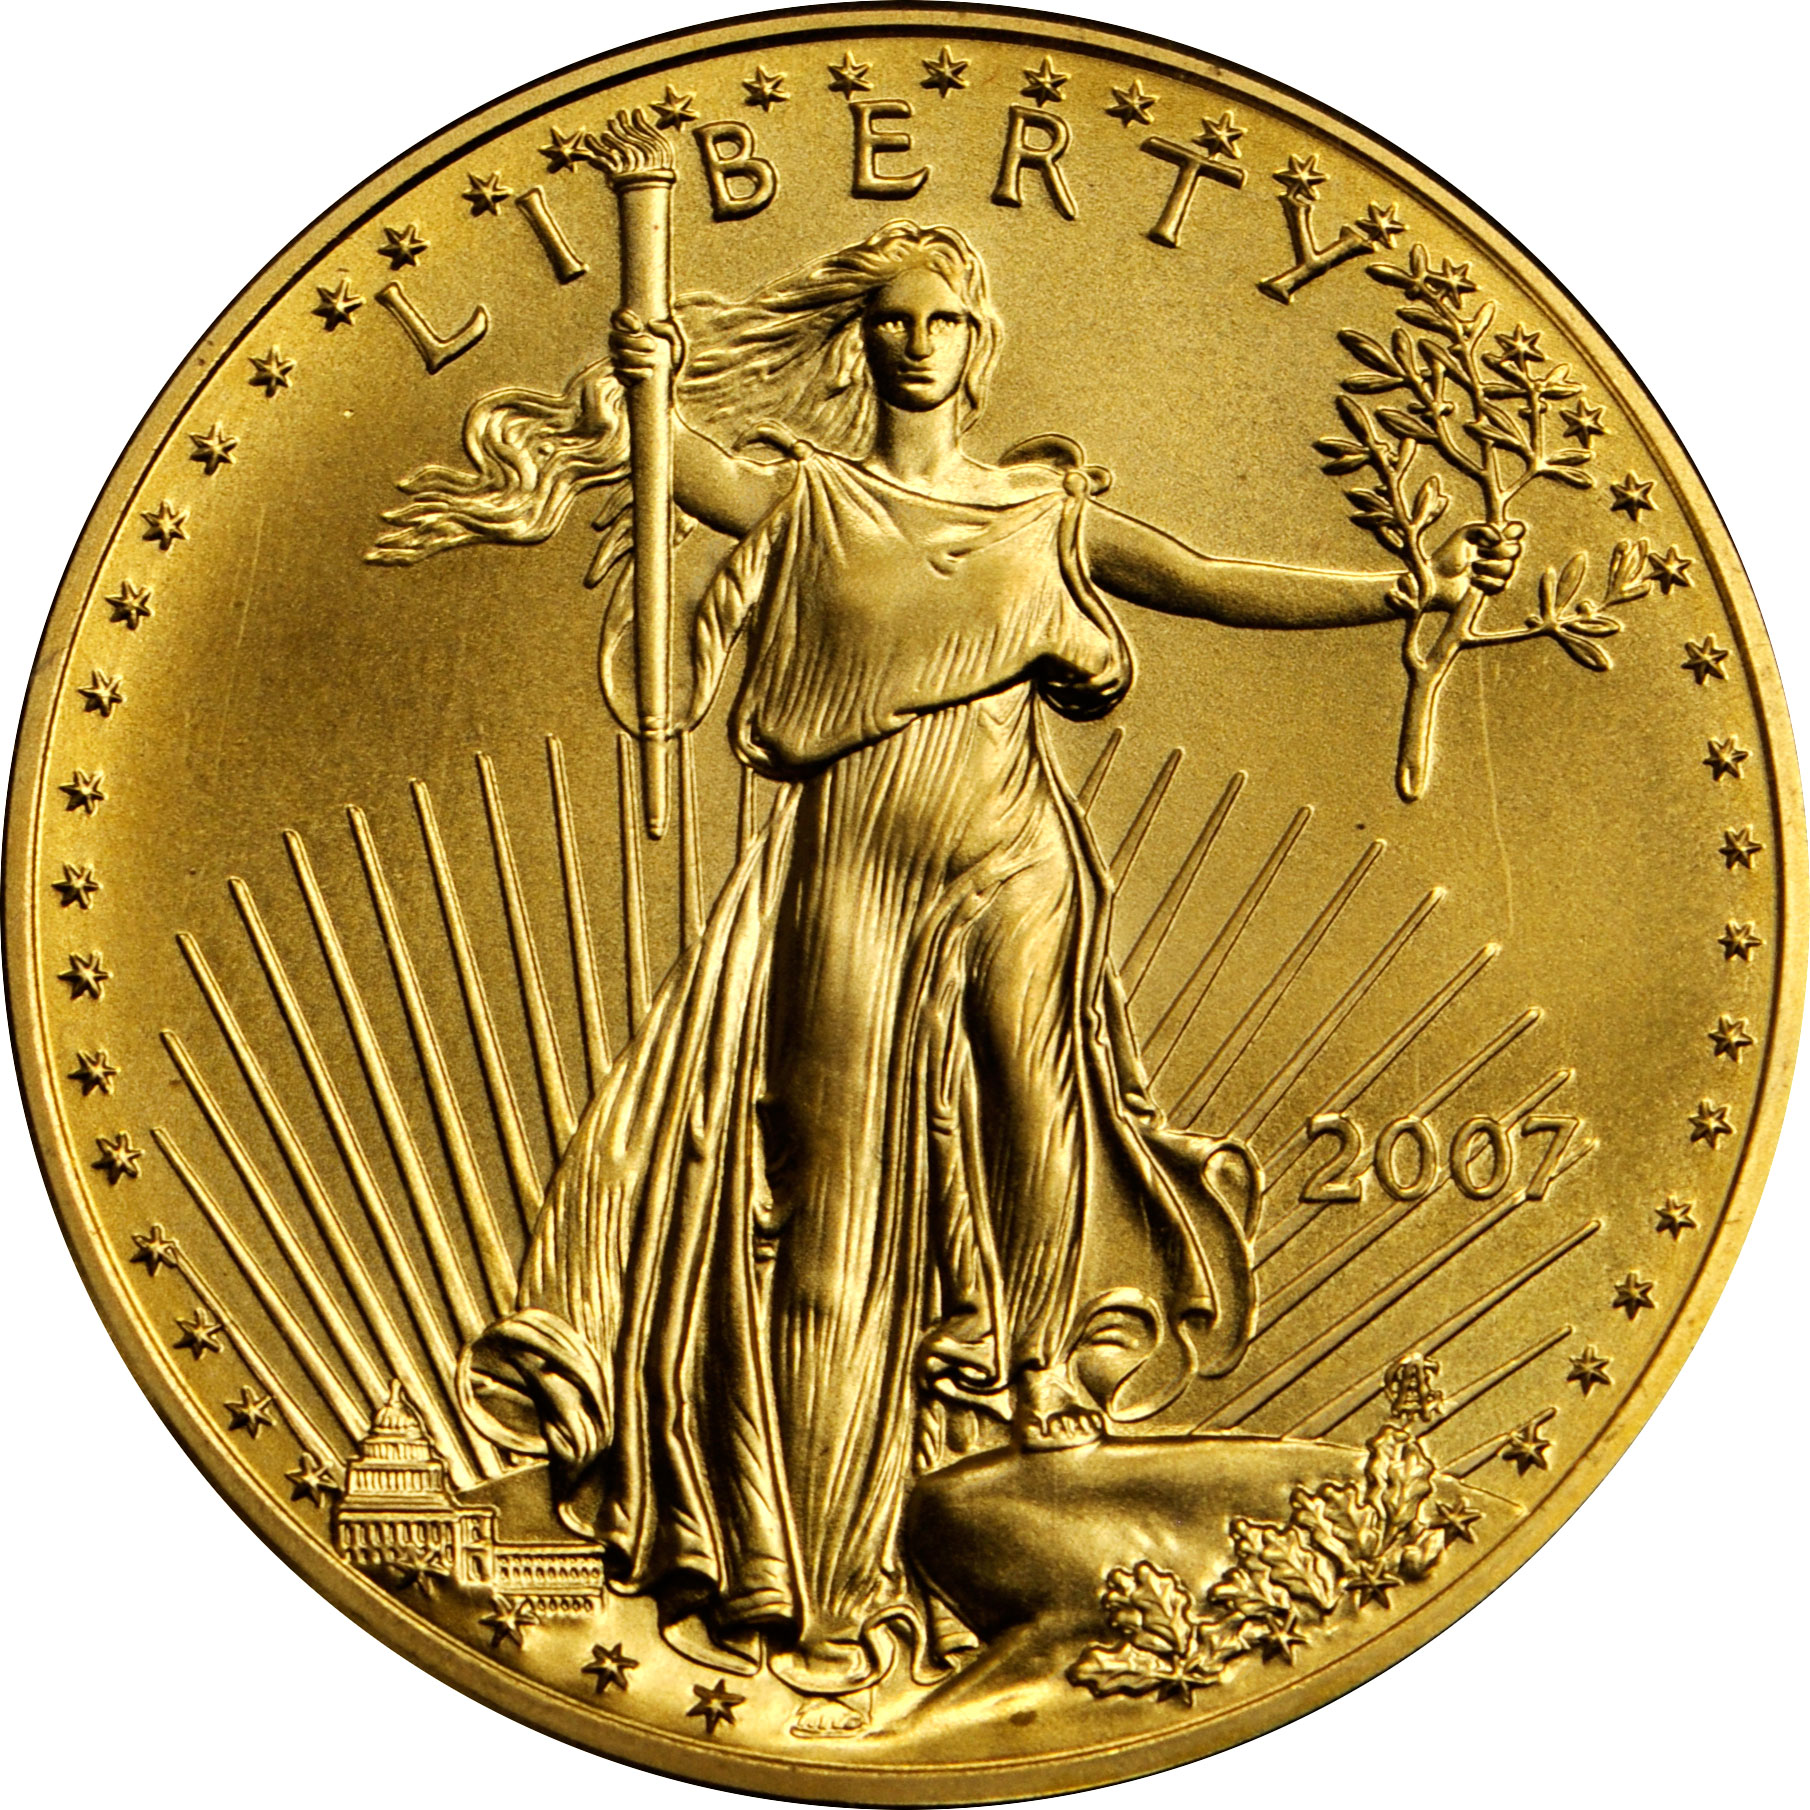 2007 gold coins